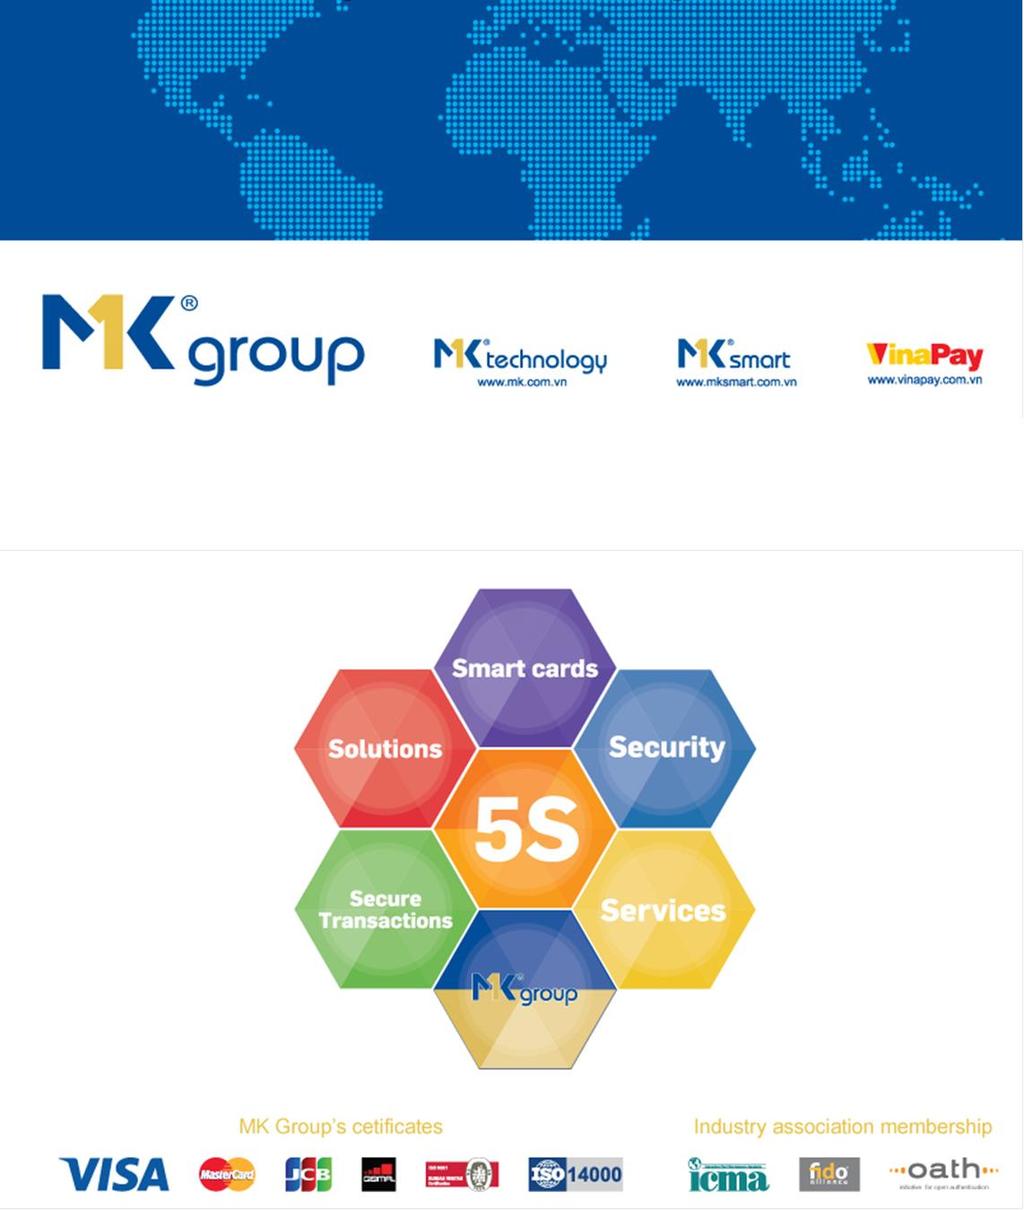 Trusted partner for Authentication and Secure solutions, Card personalization solutions and Smart card products Copyright 2017 by MK Group www.mk.com.